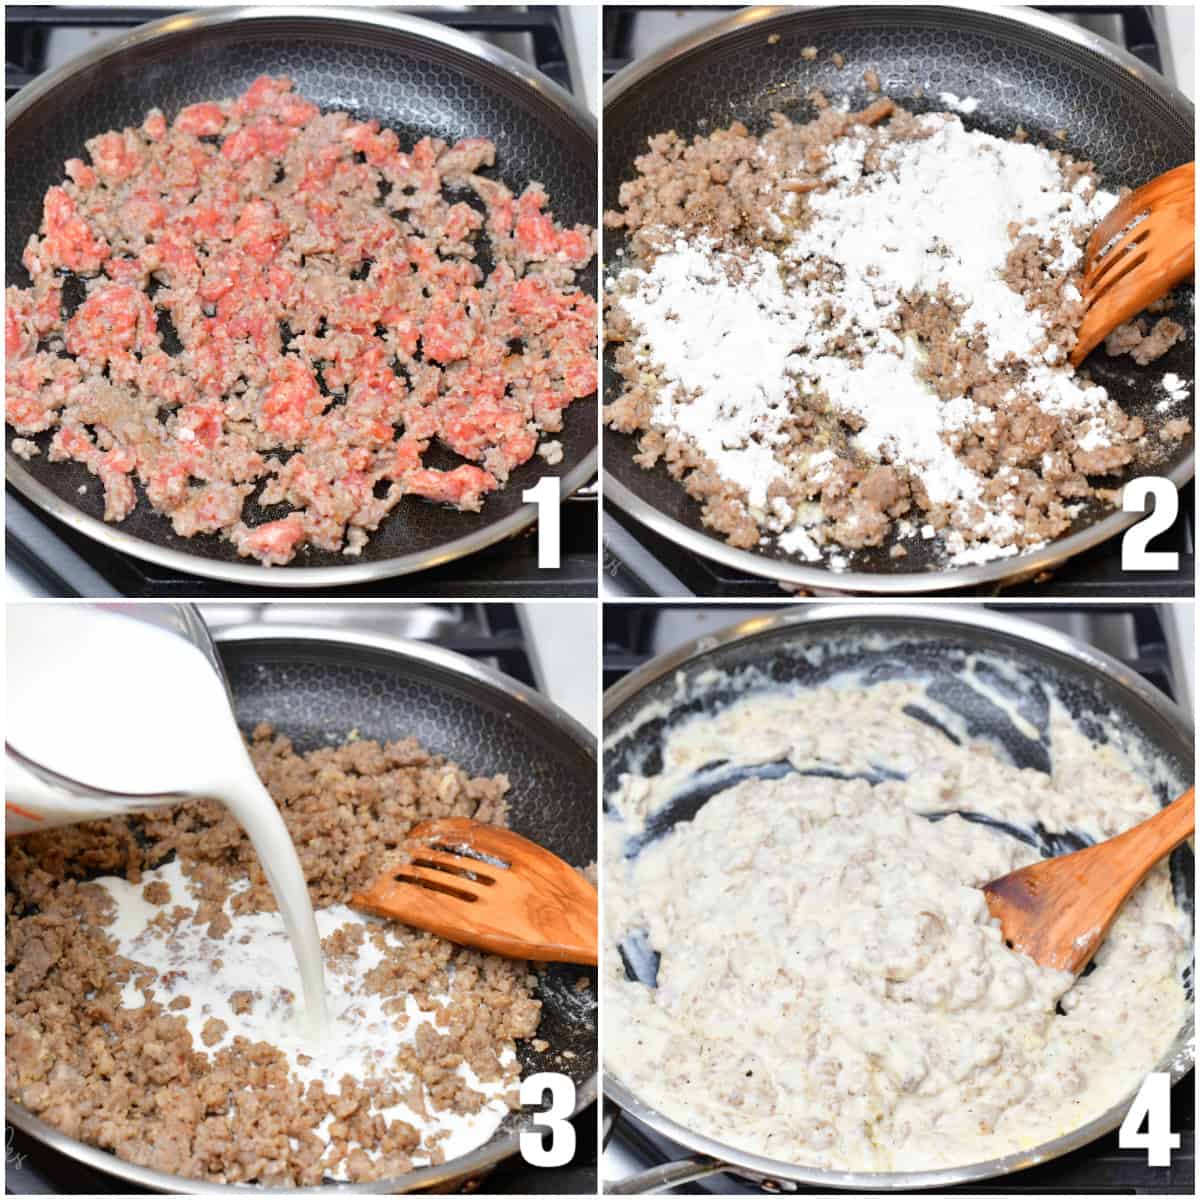 Collage of four images of steps for making sausage gravy cooking sausage, adding flour, pouring in milk.